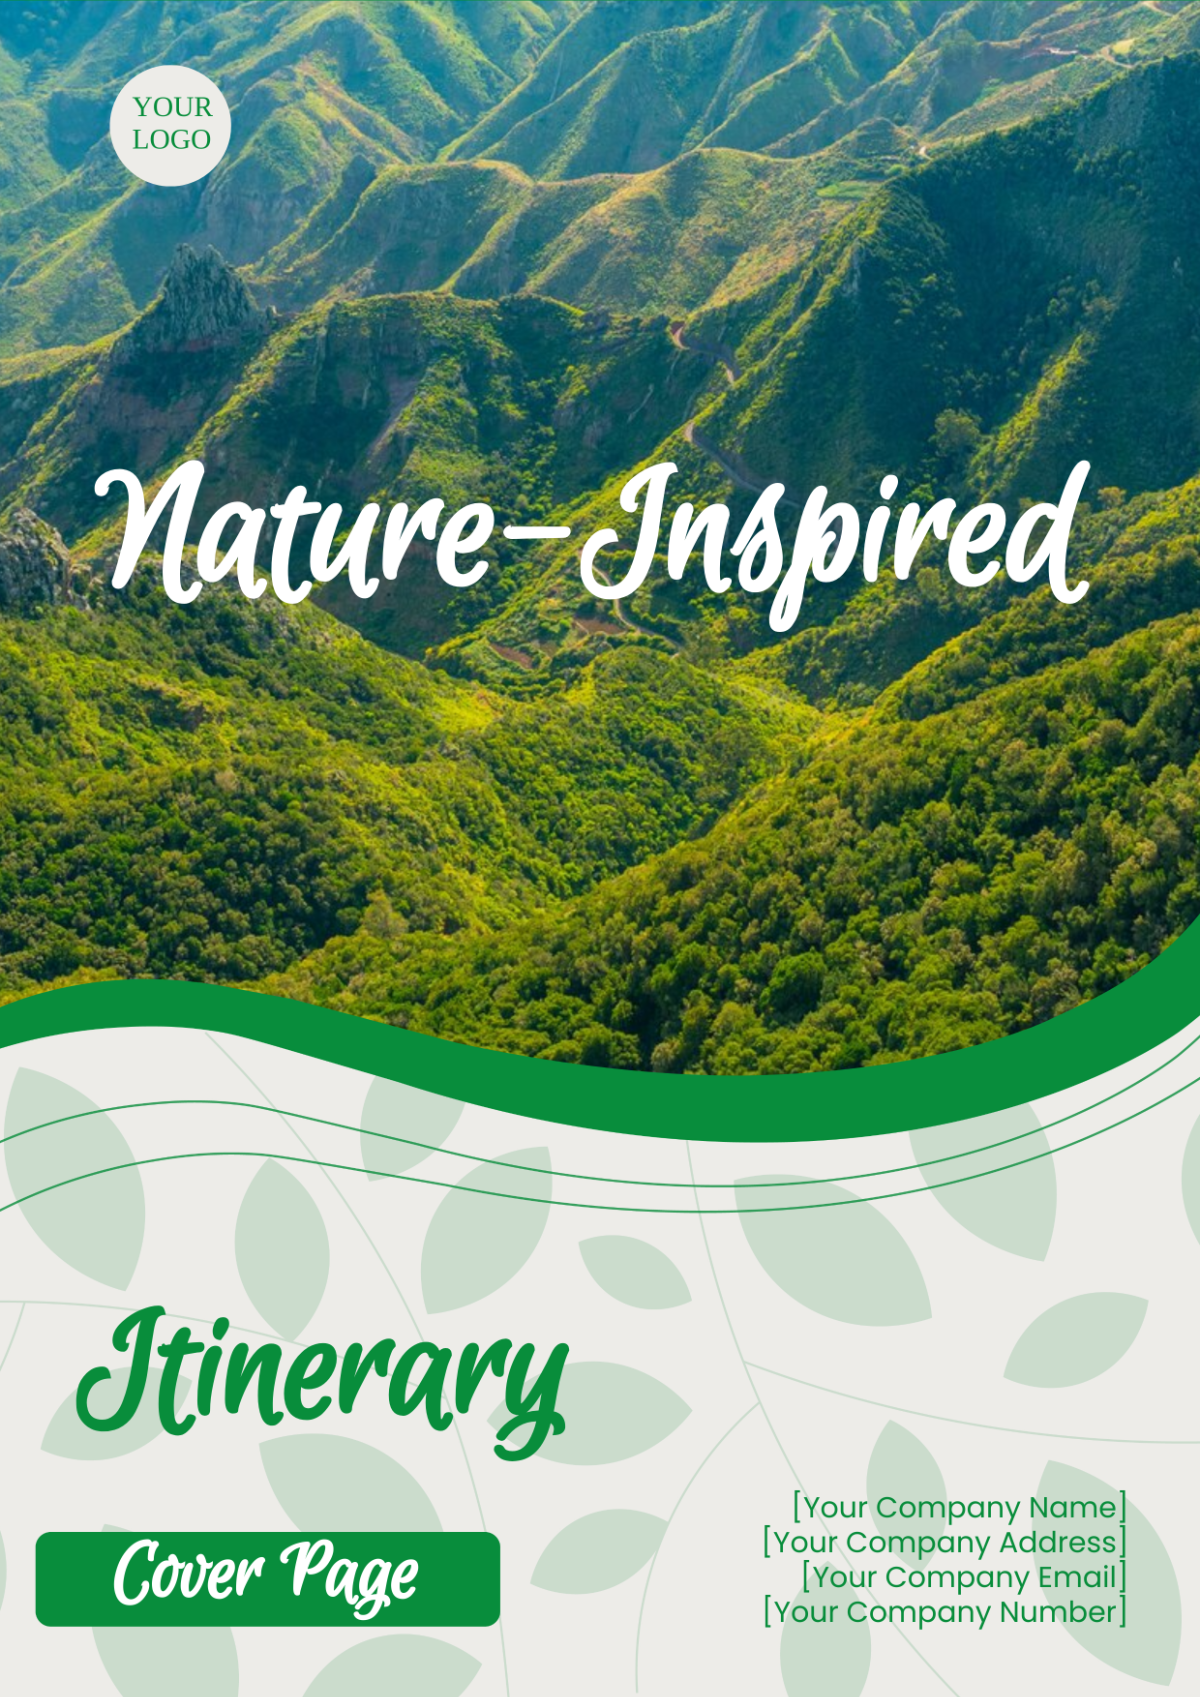 Nature-Inspired Itinerary Cover Page